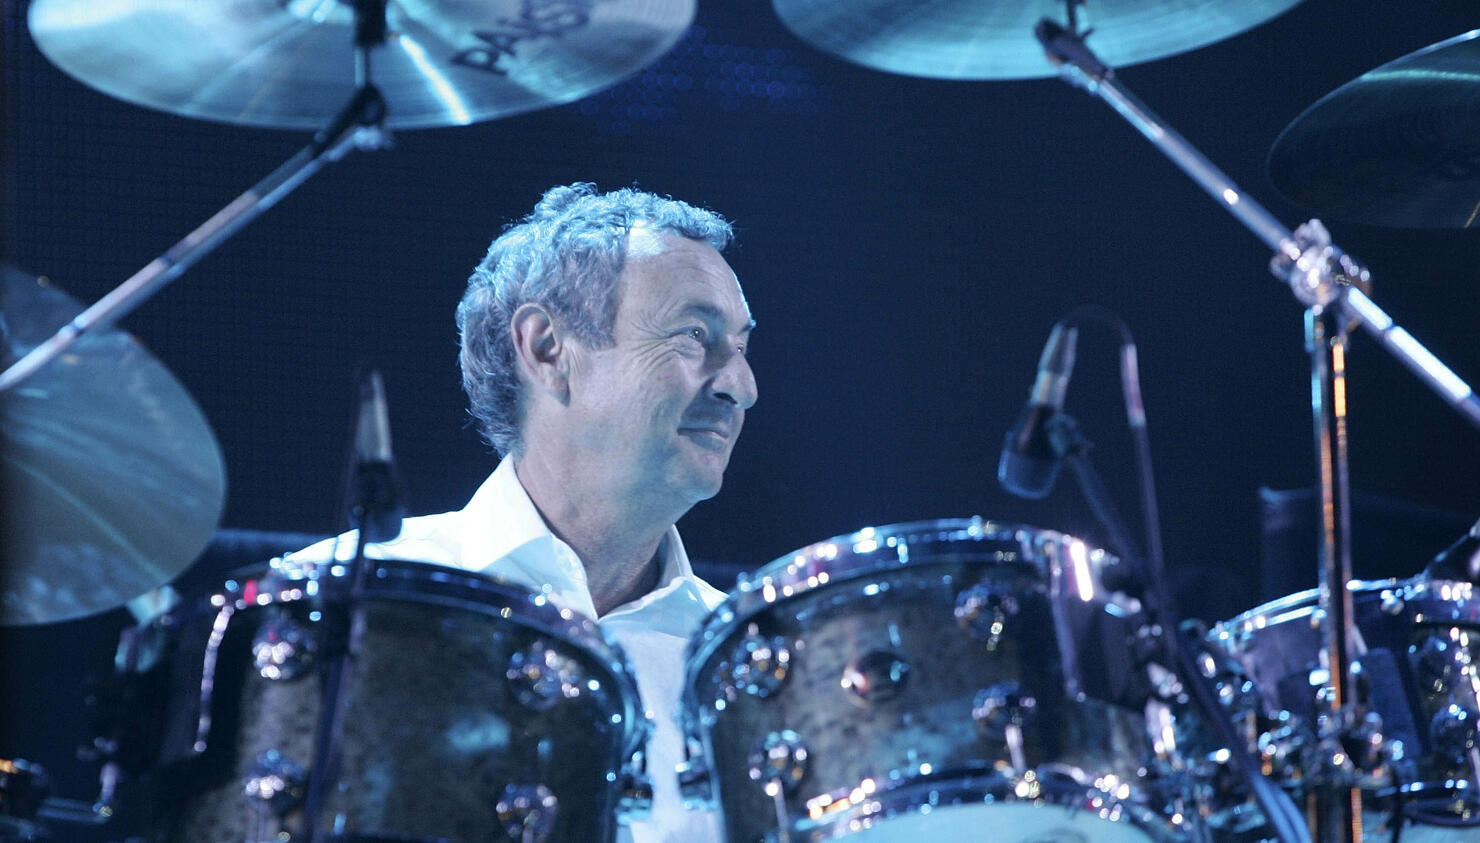 Pink Floyd Drummer Nick Mason to Tour North American in 2019